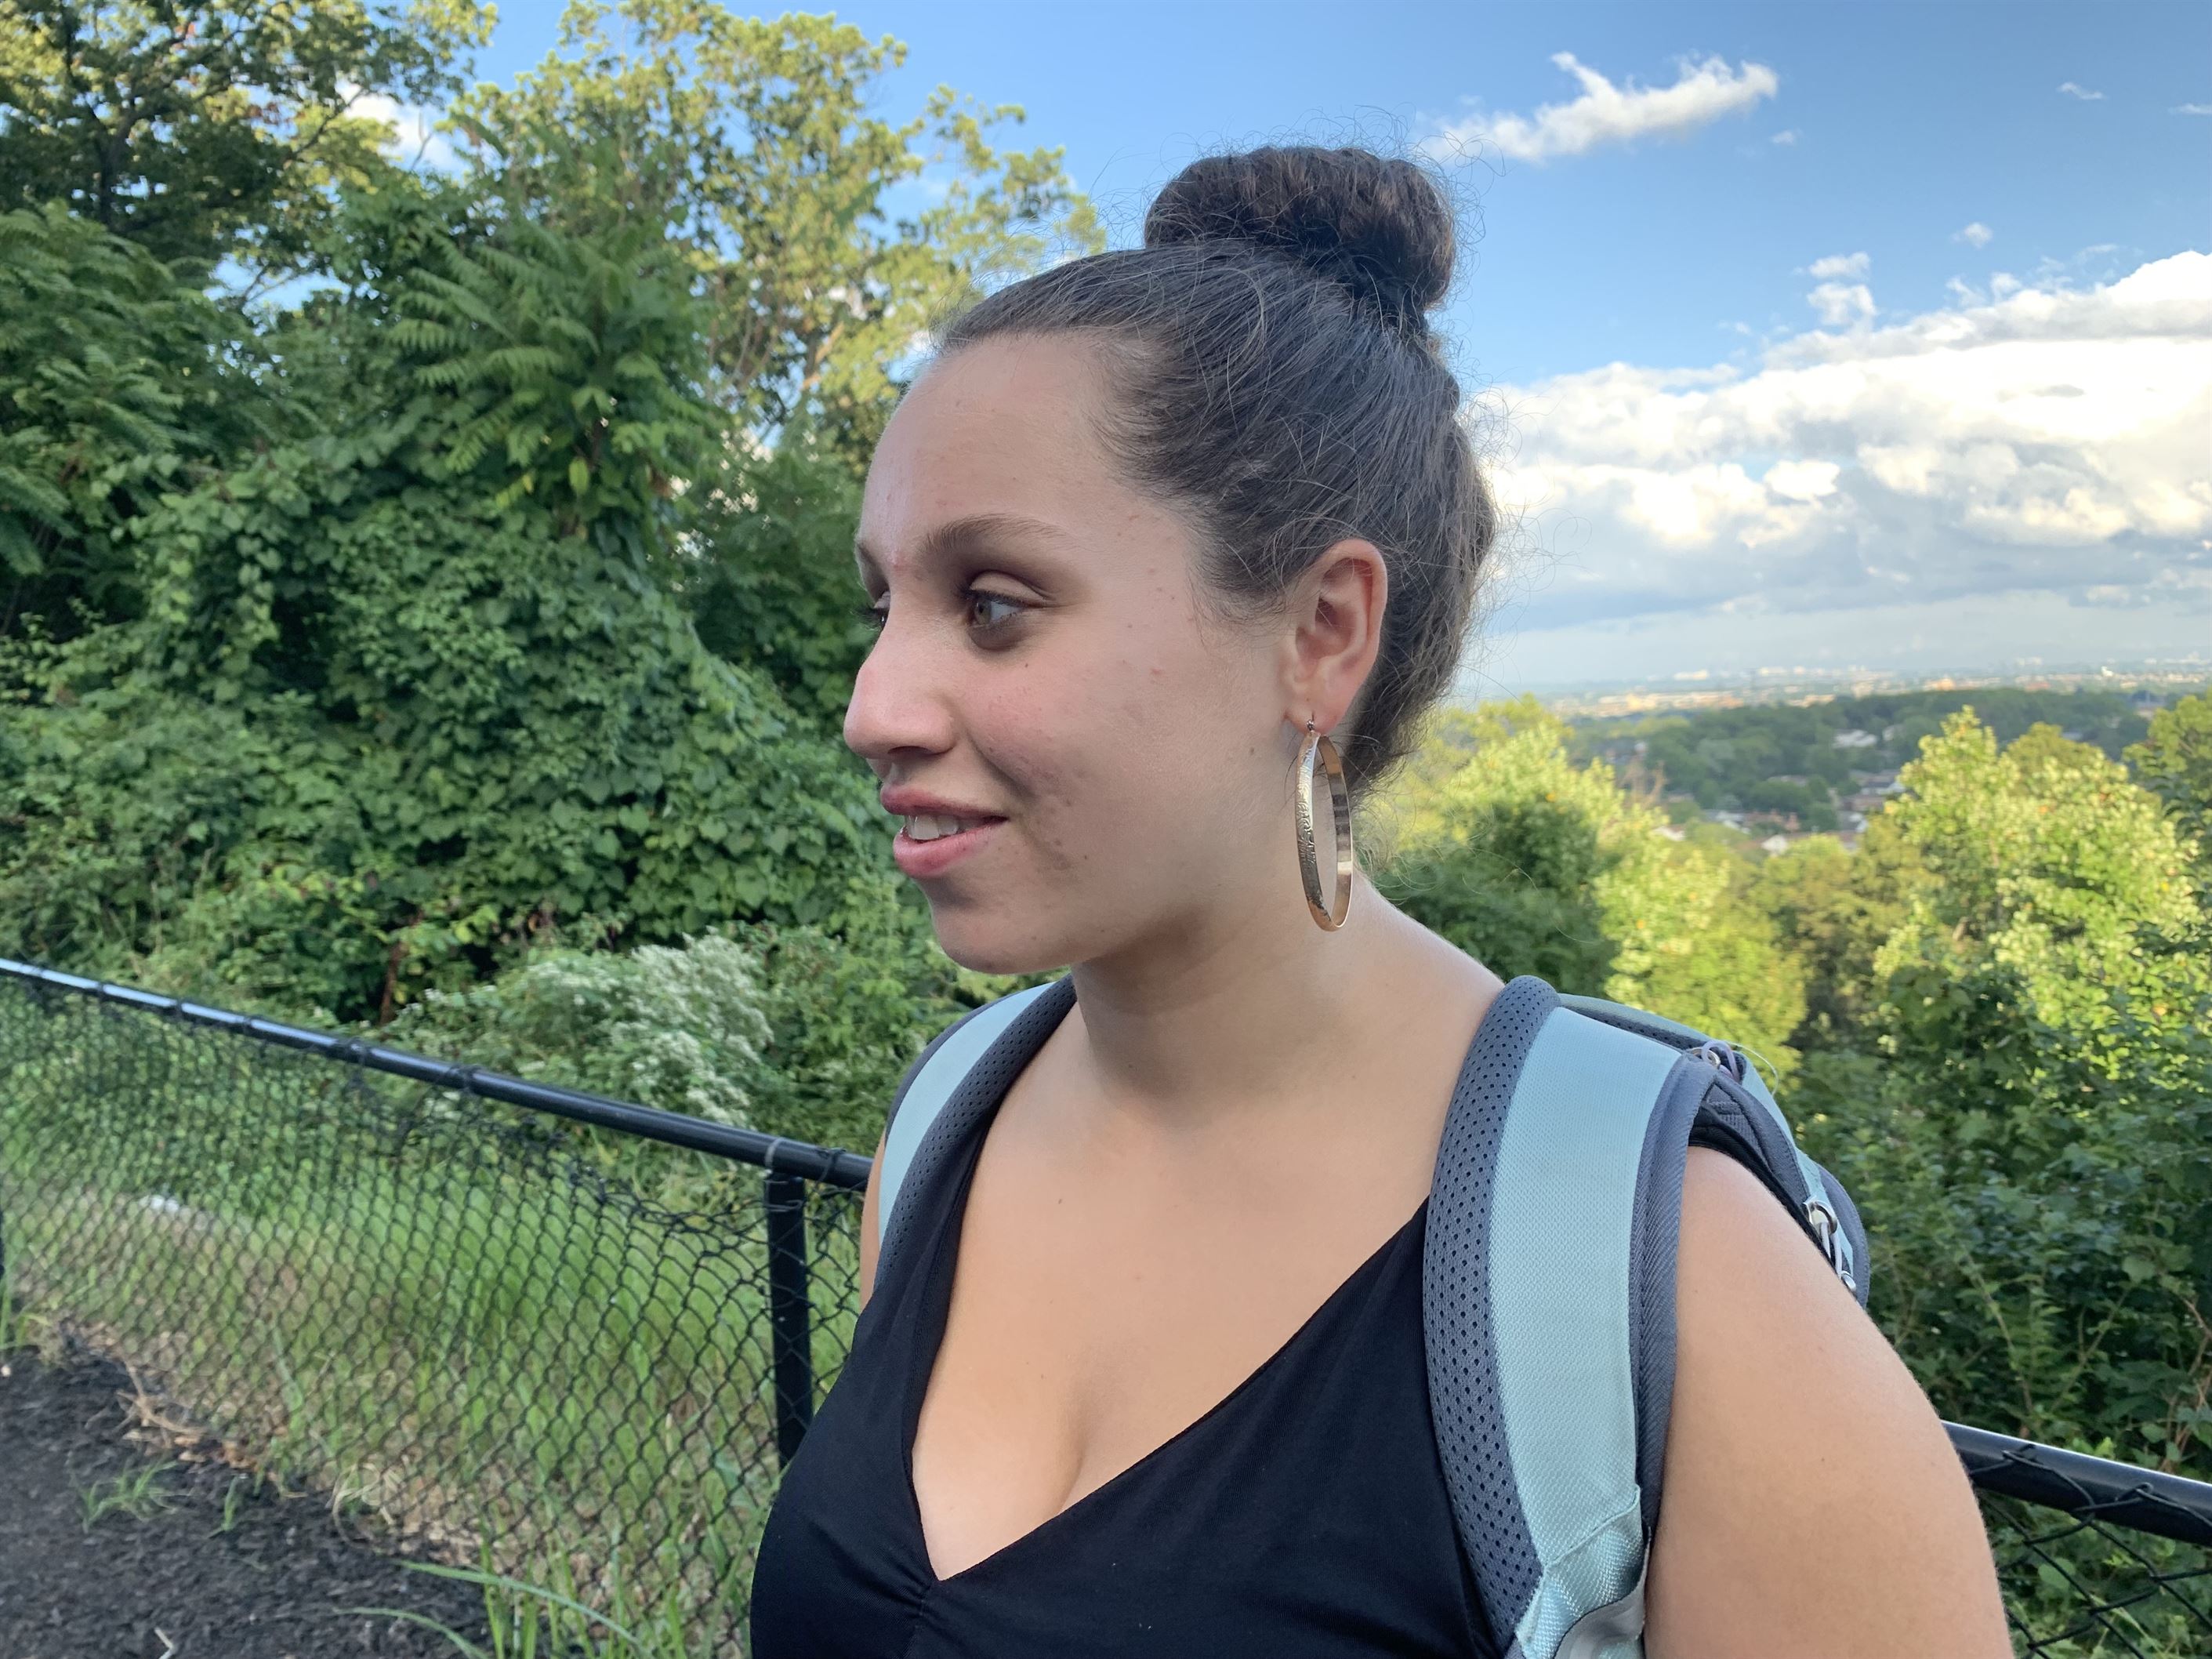 Tanis Rivera Lepore, a sophomore undeclared major, shared how she heard about wearing longer clothing could help prevent the spread of the virus. Aidan Ivers | The Montclarion